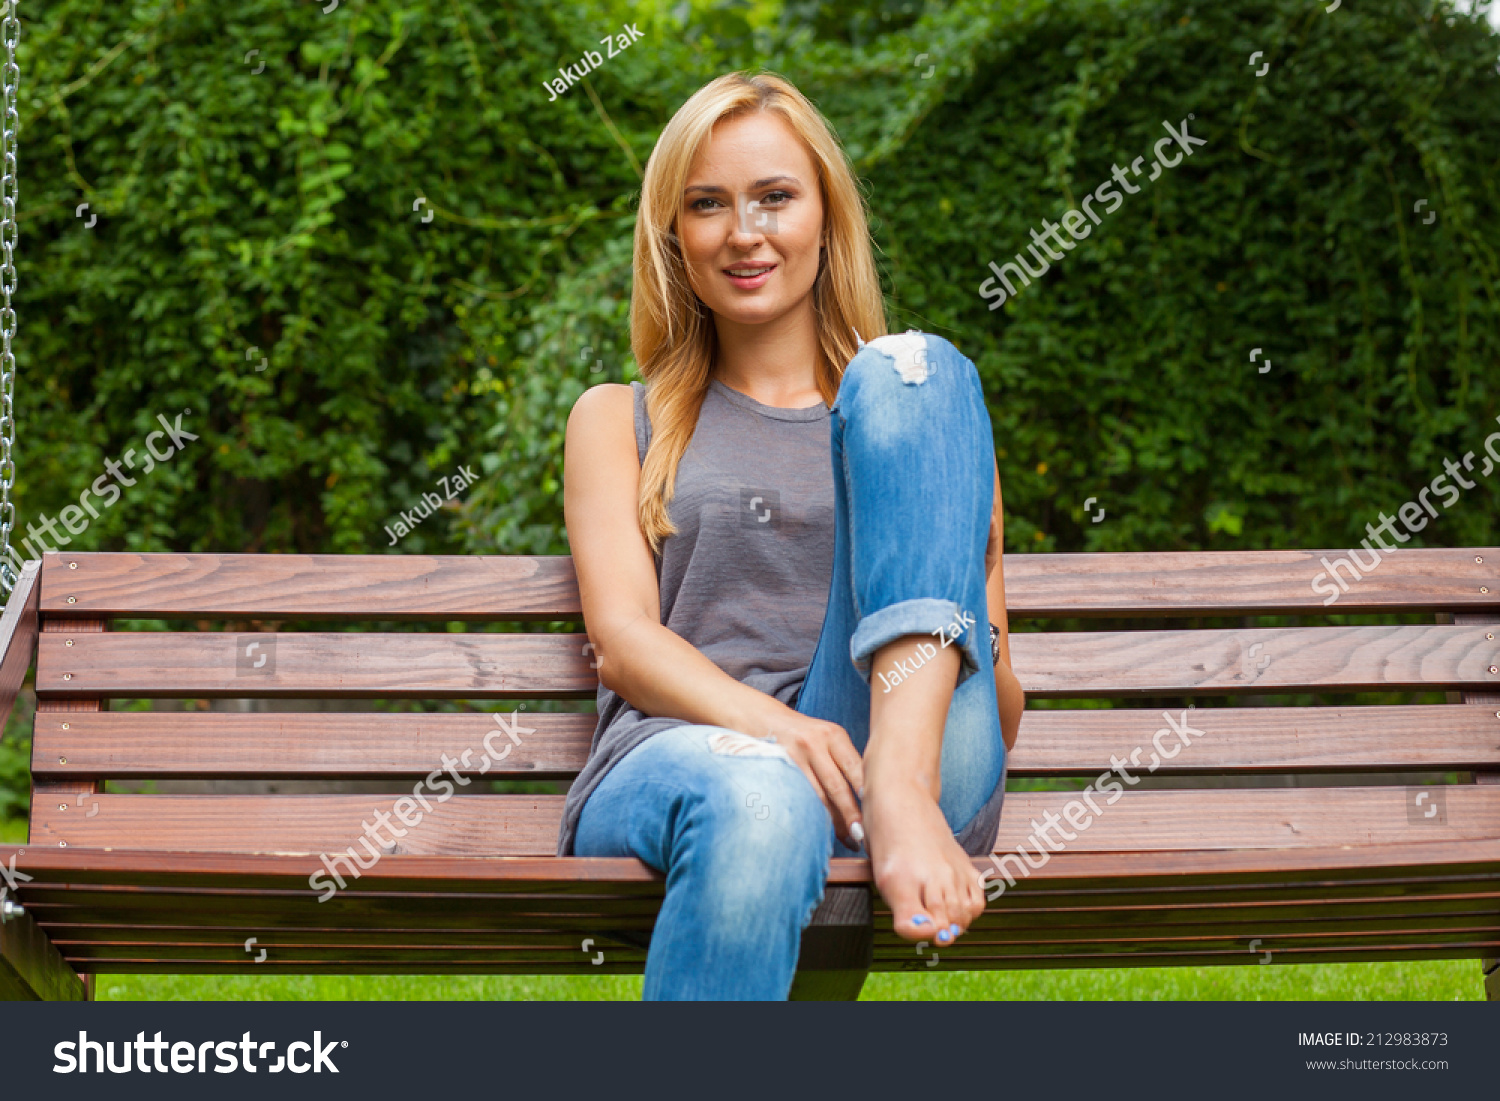 Sensual Blonde Woman Sitting In Park On Wooden Bench Outdoor Photo She Looks Relaxed